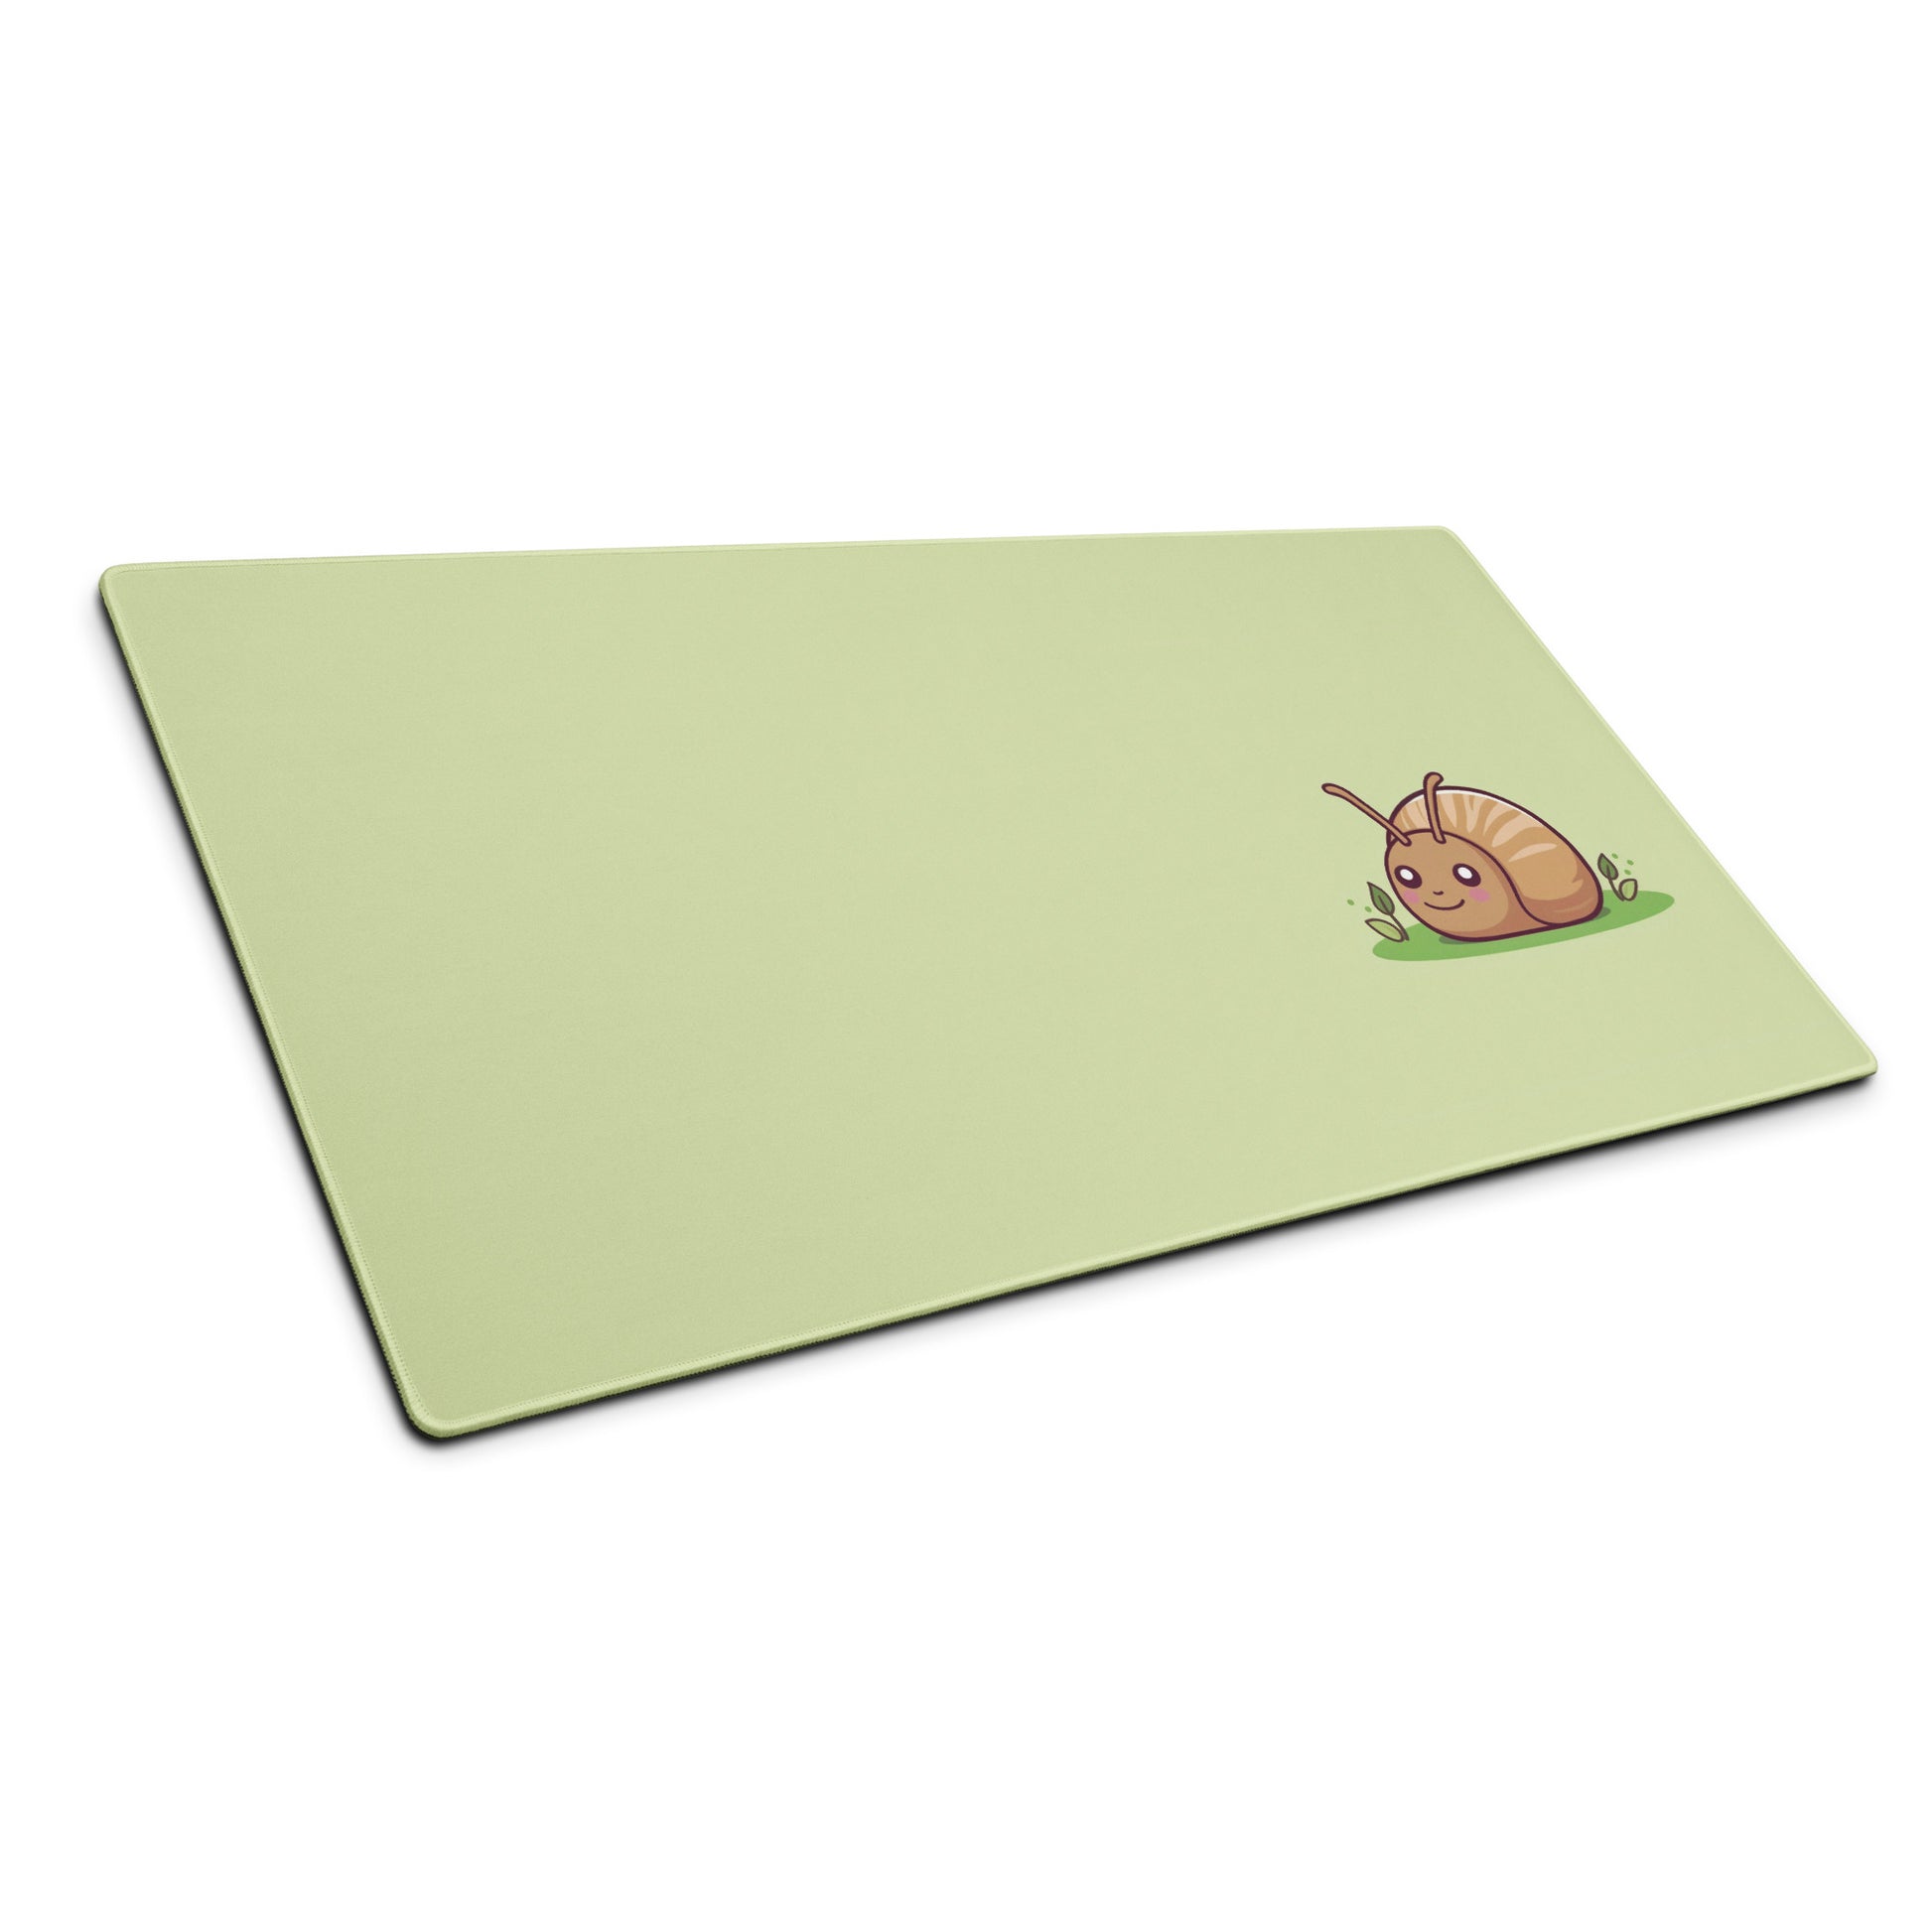 A 36" x 18" desk pad with a cute snail on it shown at an angle. Green in color.